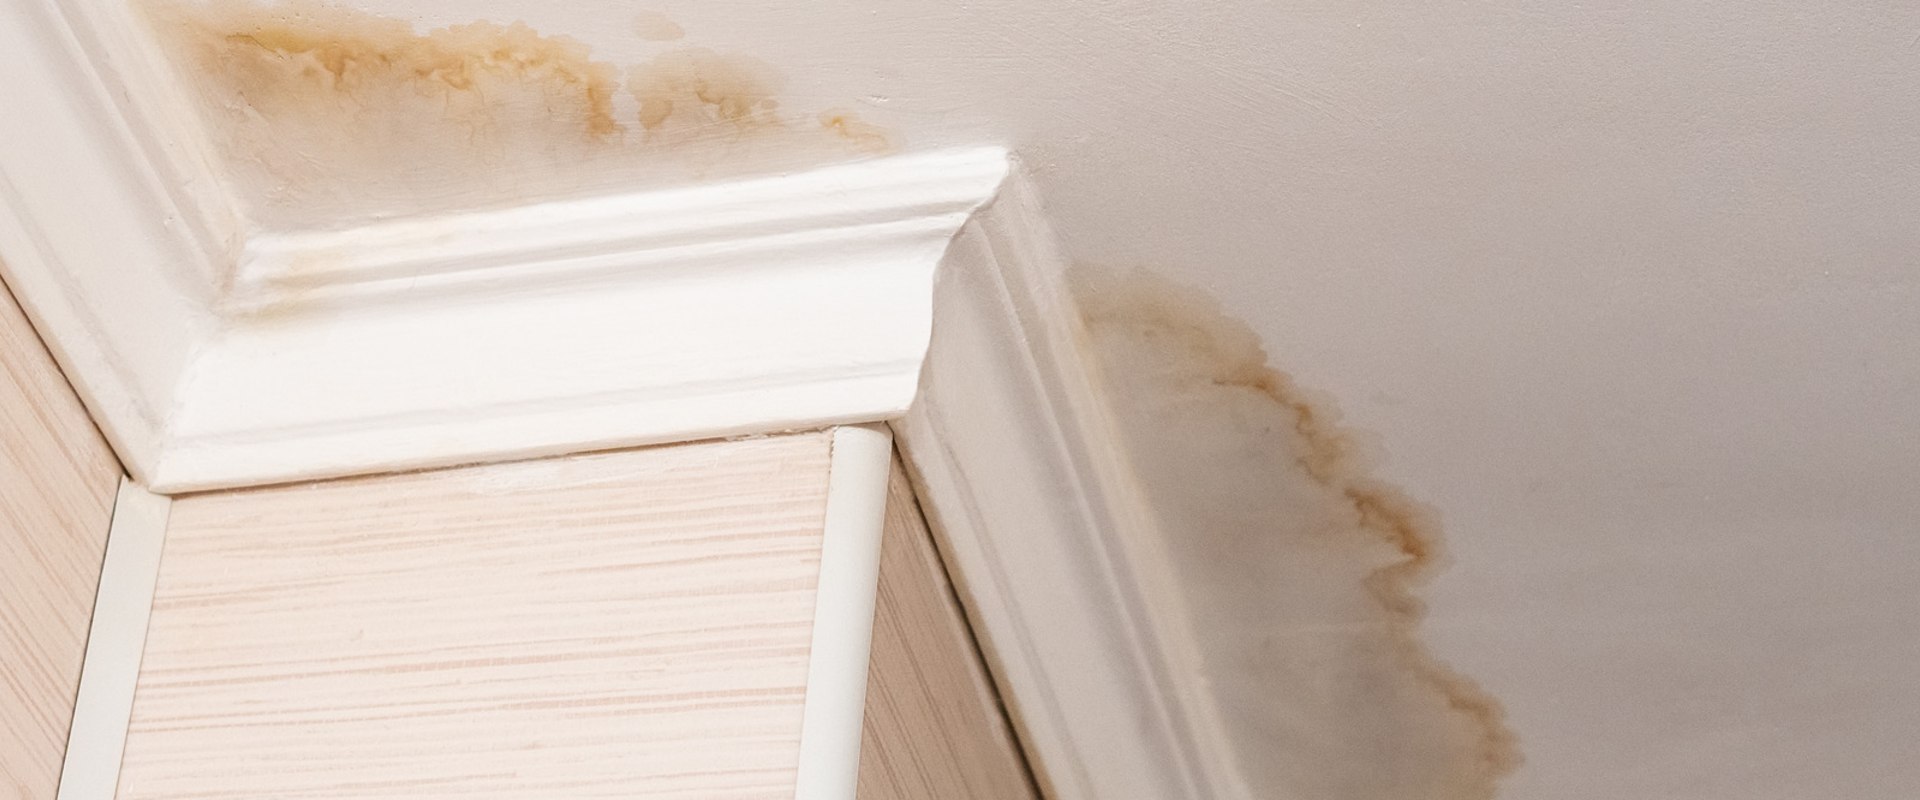 Does ceiling need to be replaced after water damage?